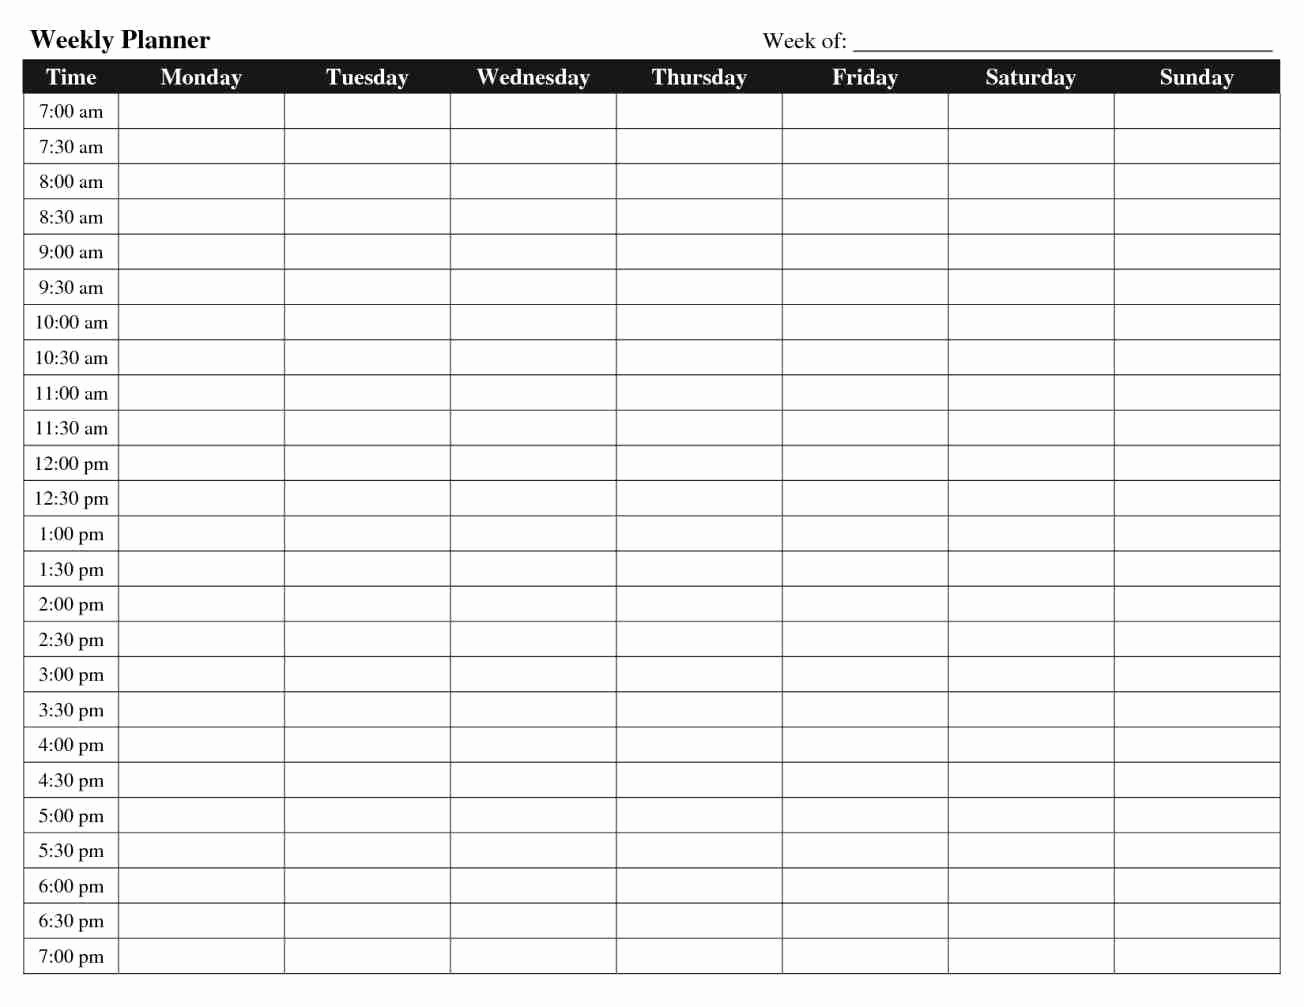 Daily Hourly Schedule Excel Template Lovely Hourly Schedule Template